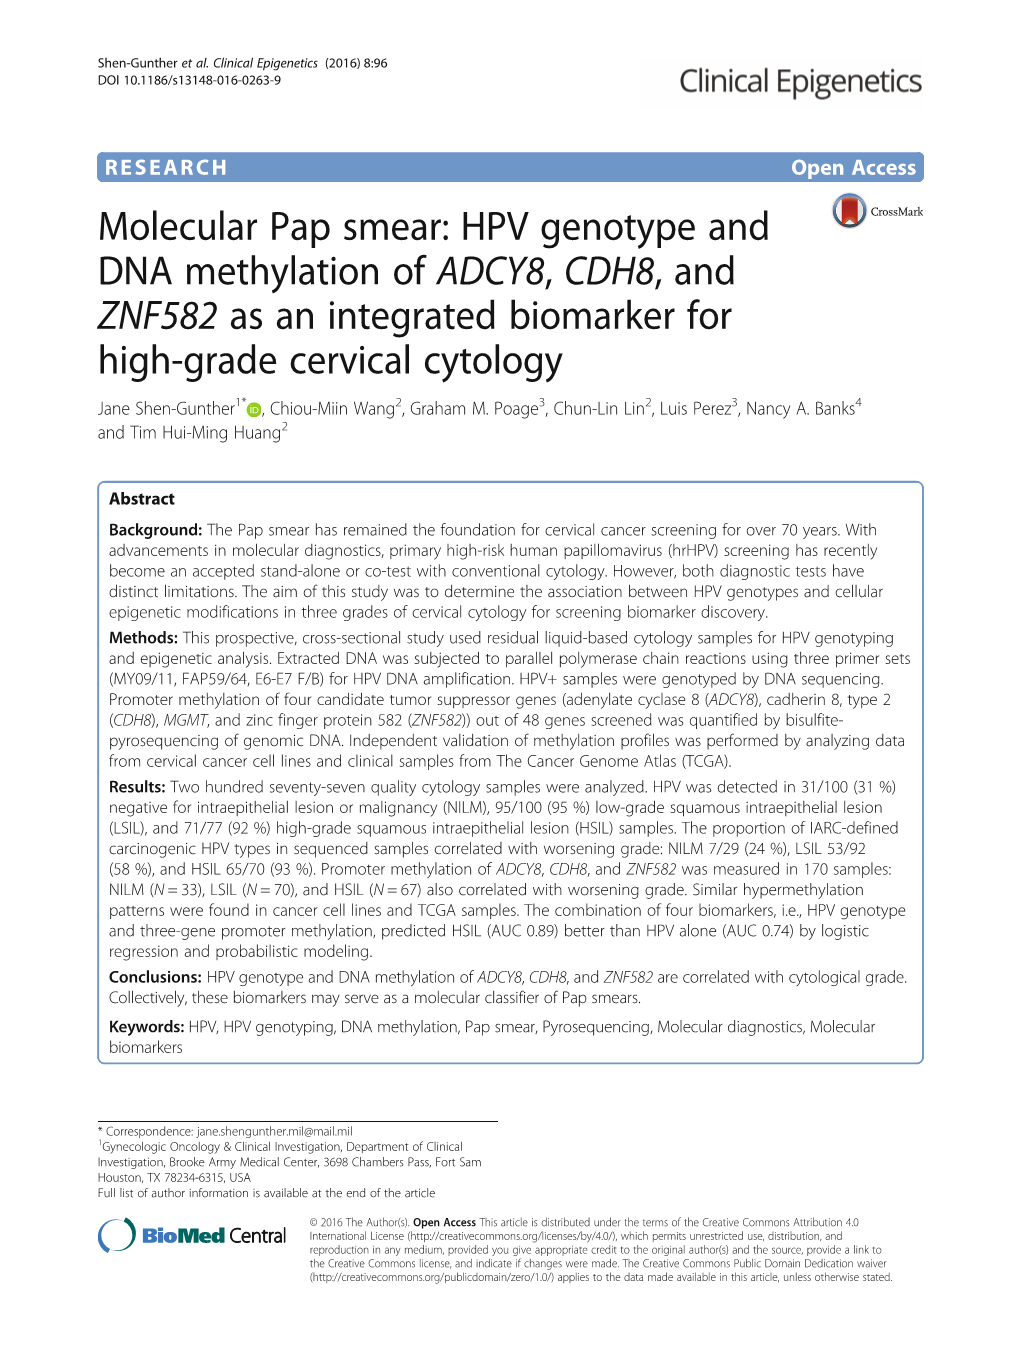 Molecular Pap Smear: HPV Genotype and DNA Methylation of ADCY8